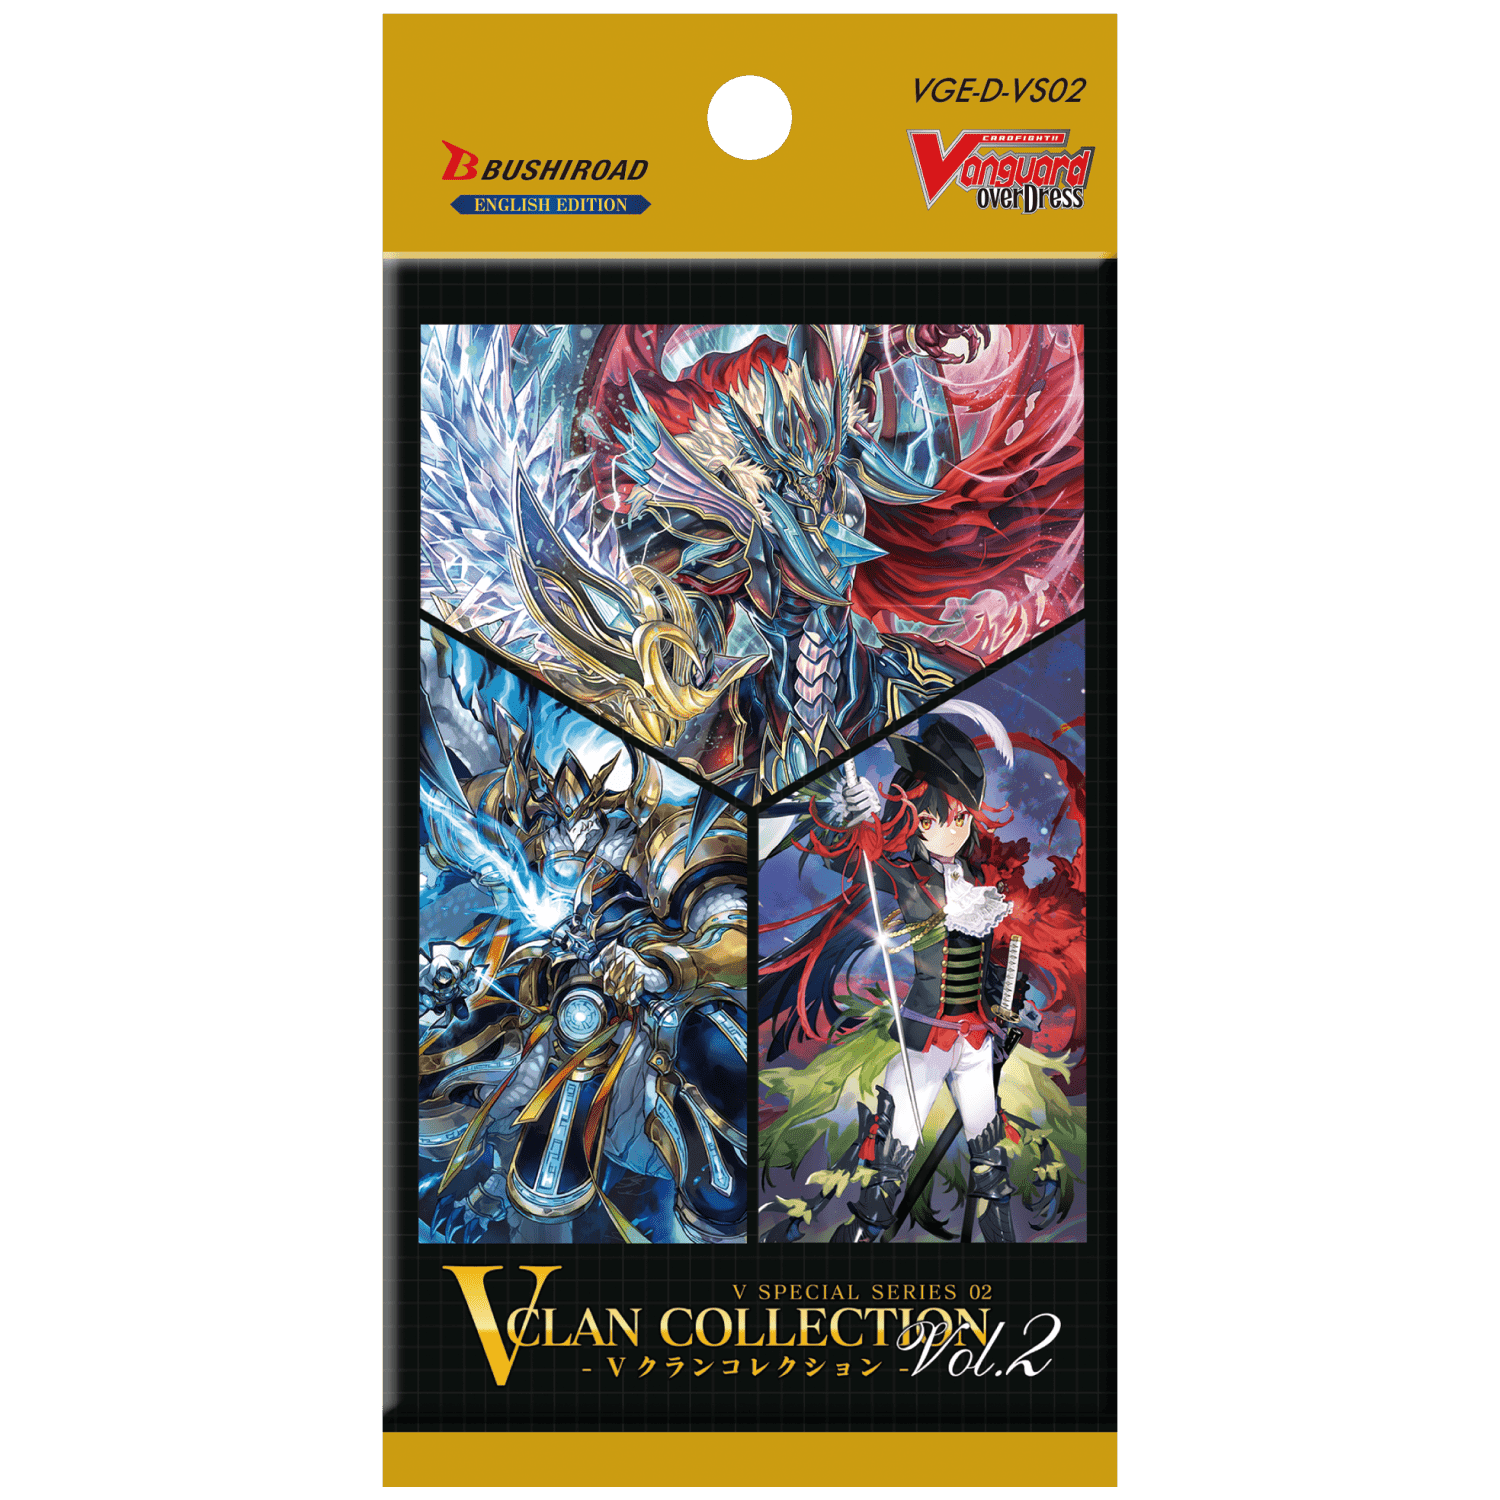 Cardfight!! Vanguard - OverDress: V Special Series - V Clan Collection Vol.2 Booster Pack - The Card Vault